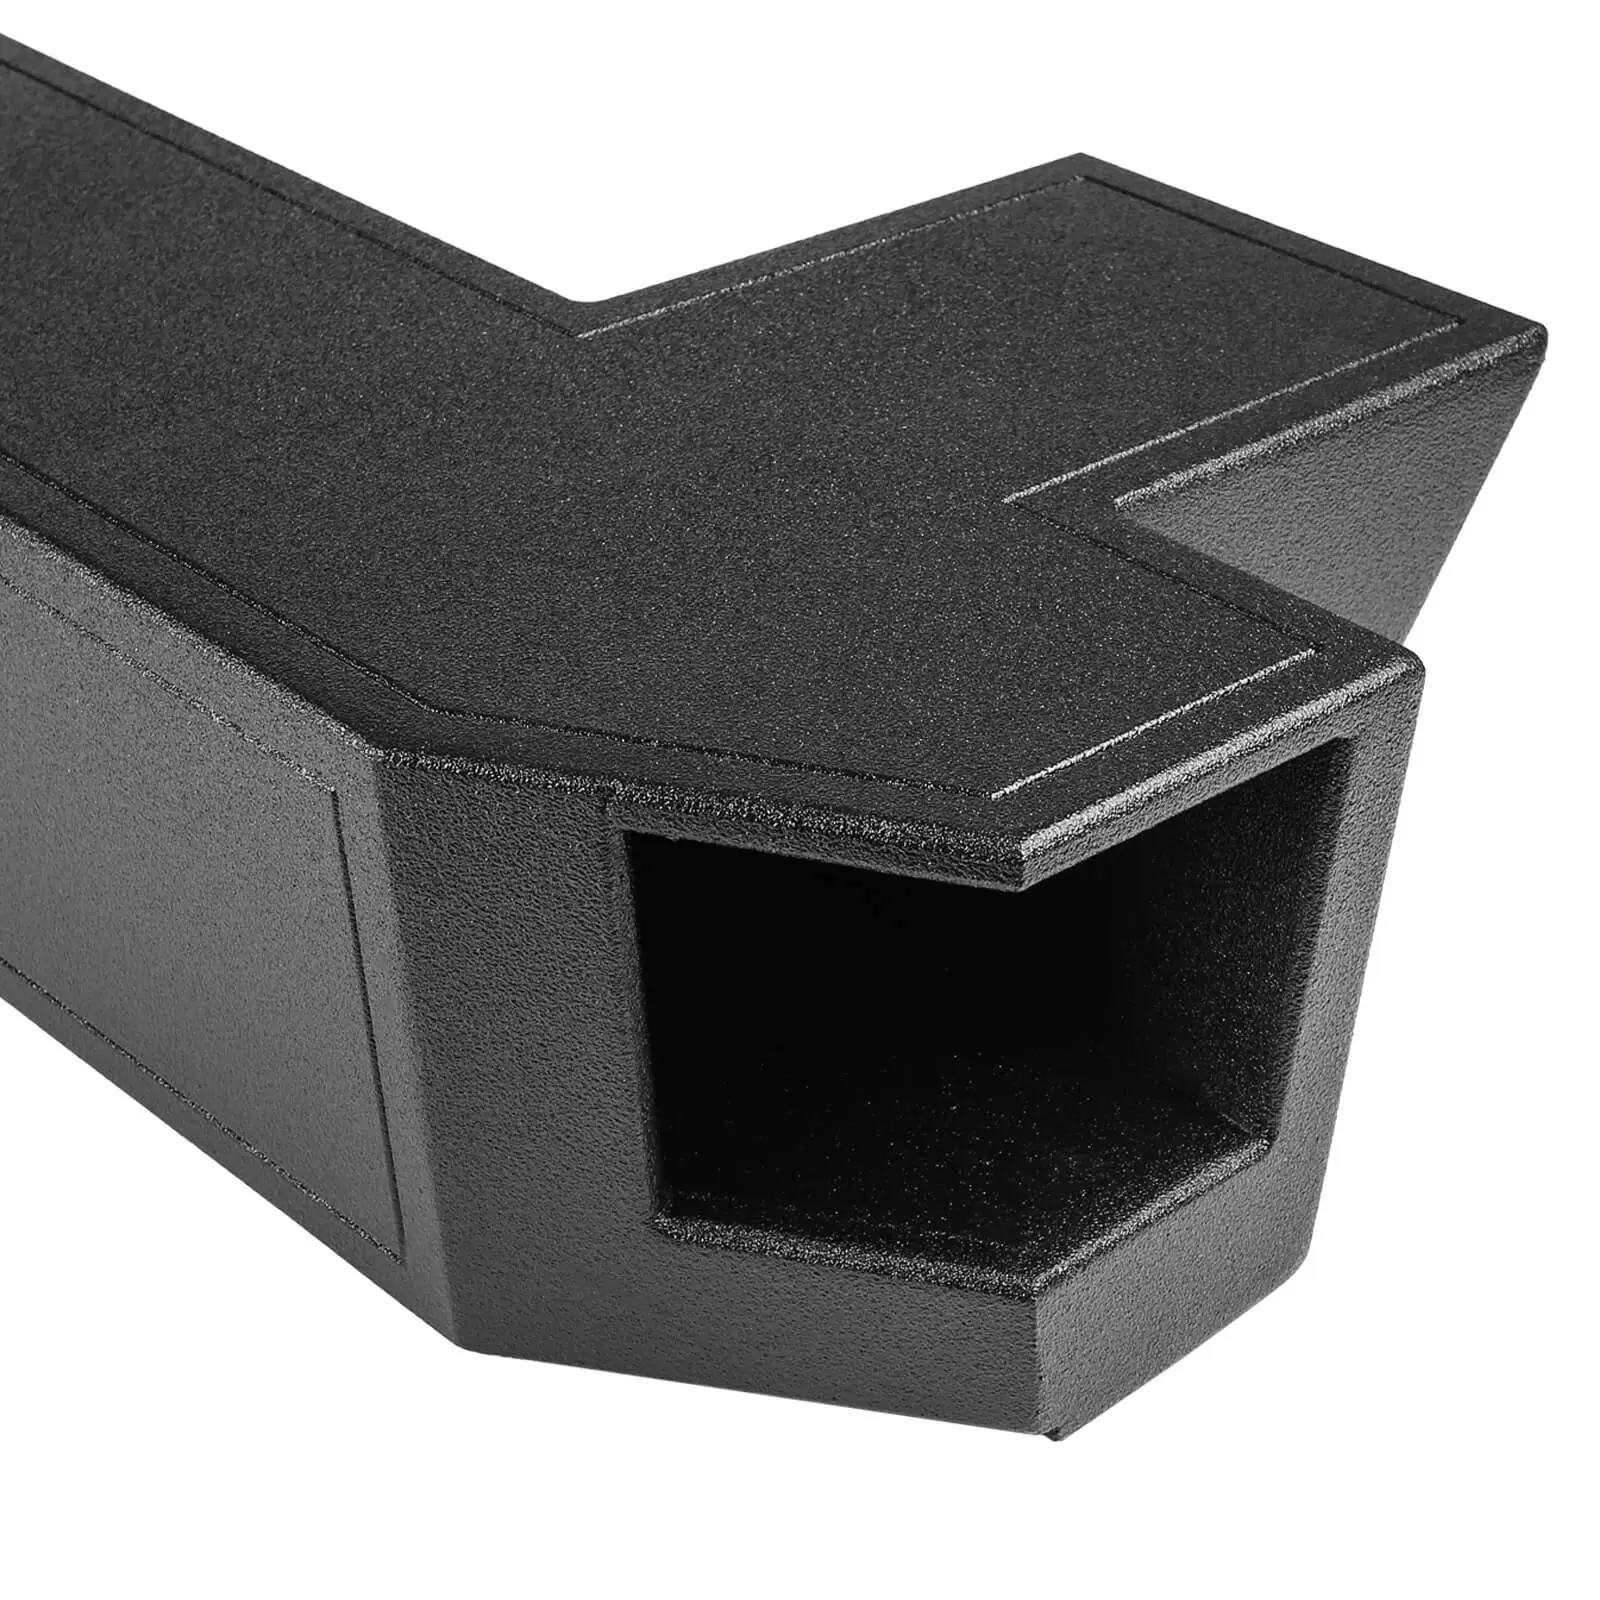 2019-2024 Ram 1500 (5th Gen) Crew Cab Compatible Dual 8" Ported Armor Coated Subwoofer Enclosure #5